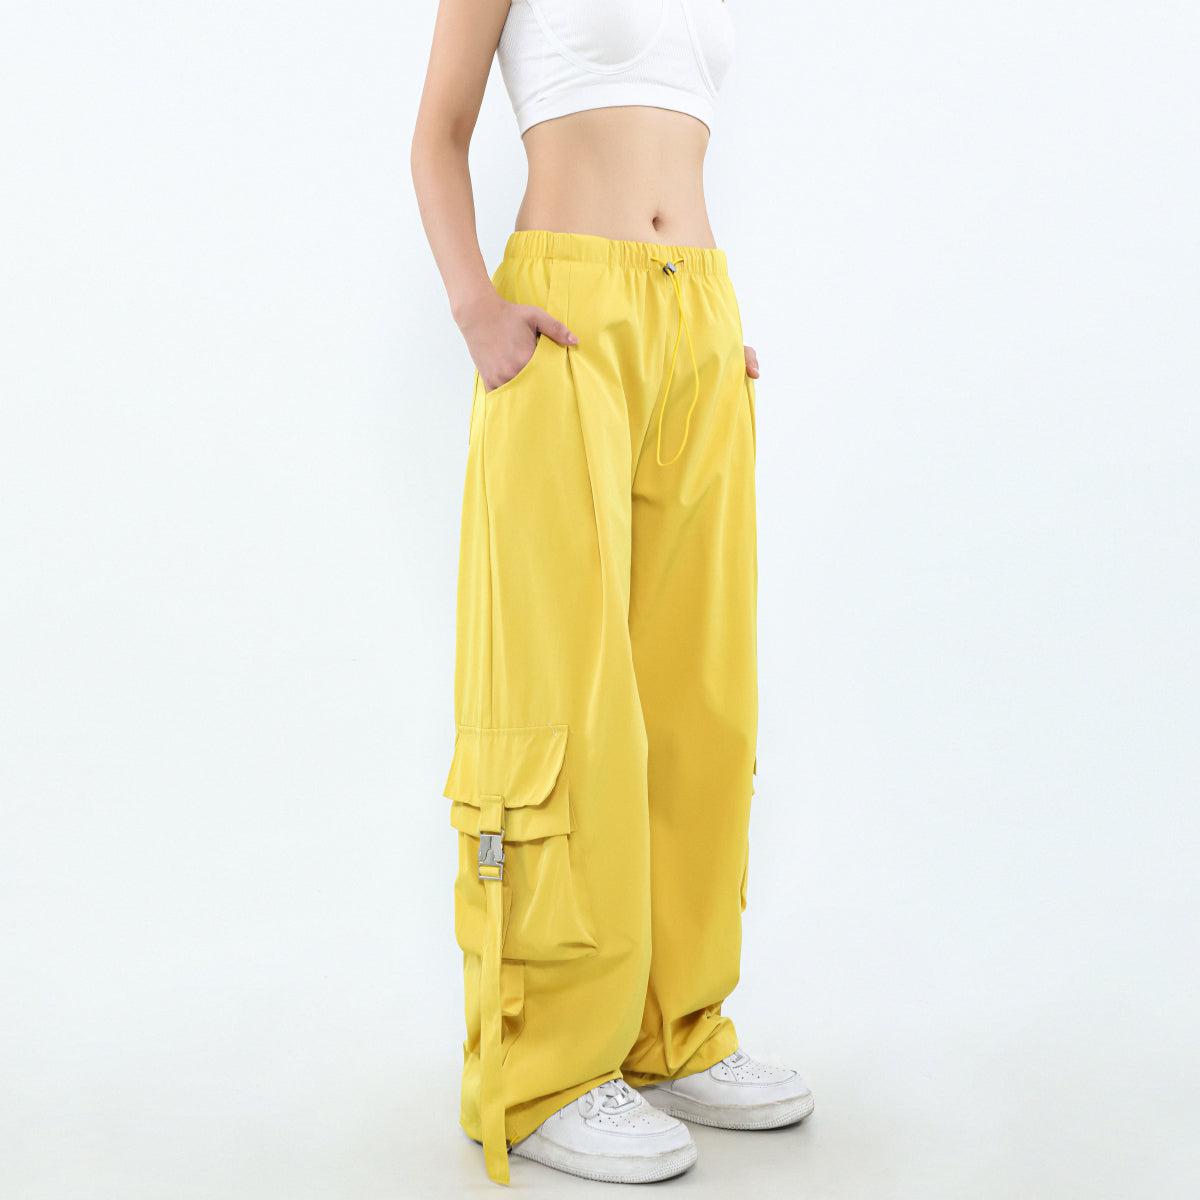 Buckle Strap Pocket Cargo Pants Korean Street Fashion Pants By Mr Nearly Shop Online at OH Vault